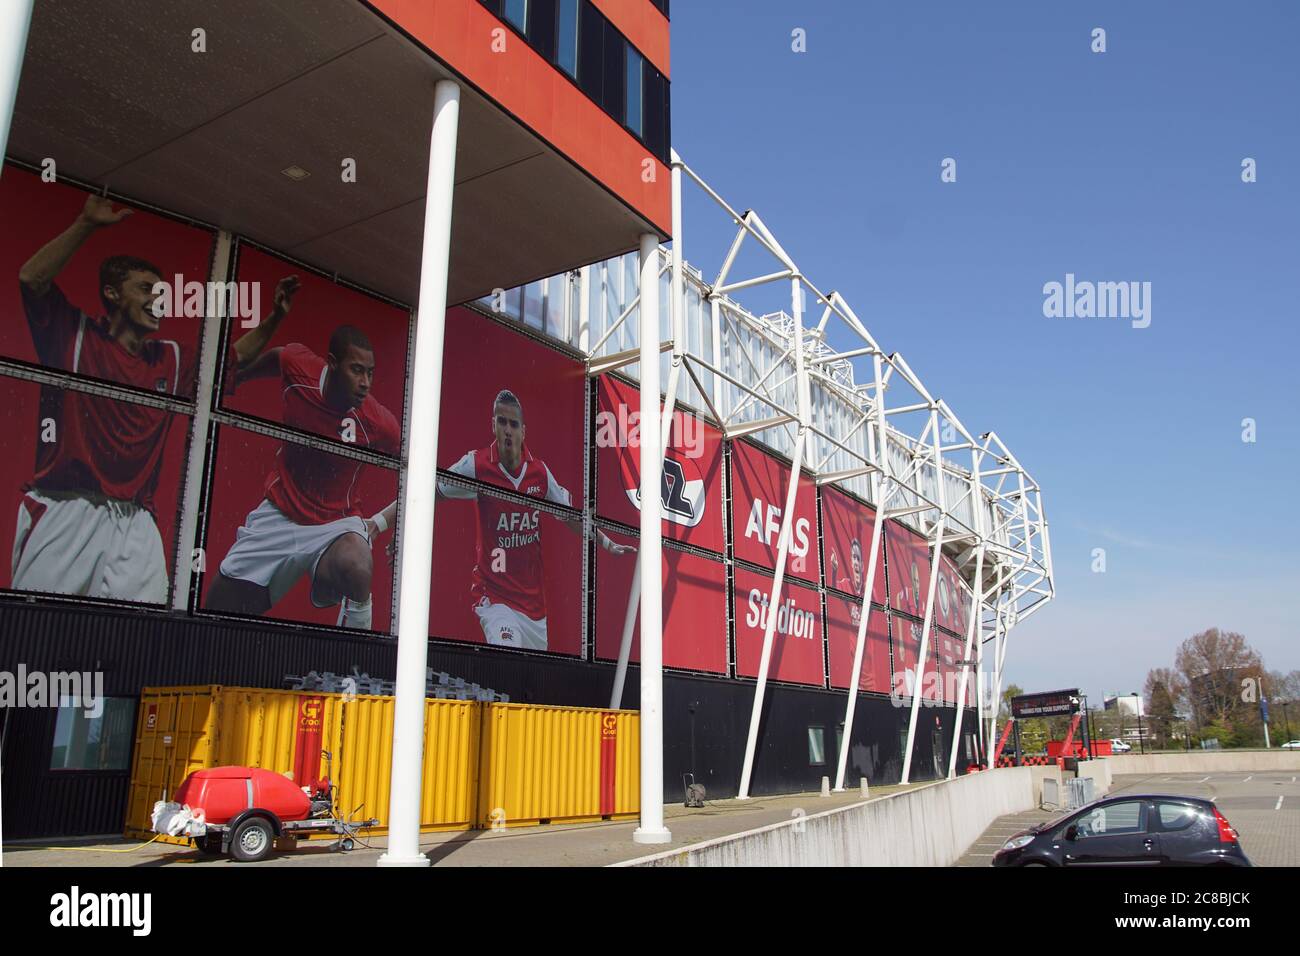 Afas soccer stadium (AFAS Stadion) of the football team AZ Alkmaar in the Dutch Province of North Holland. Netherlands, April Stock Photo